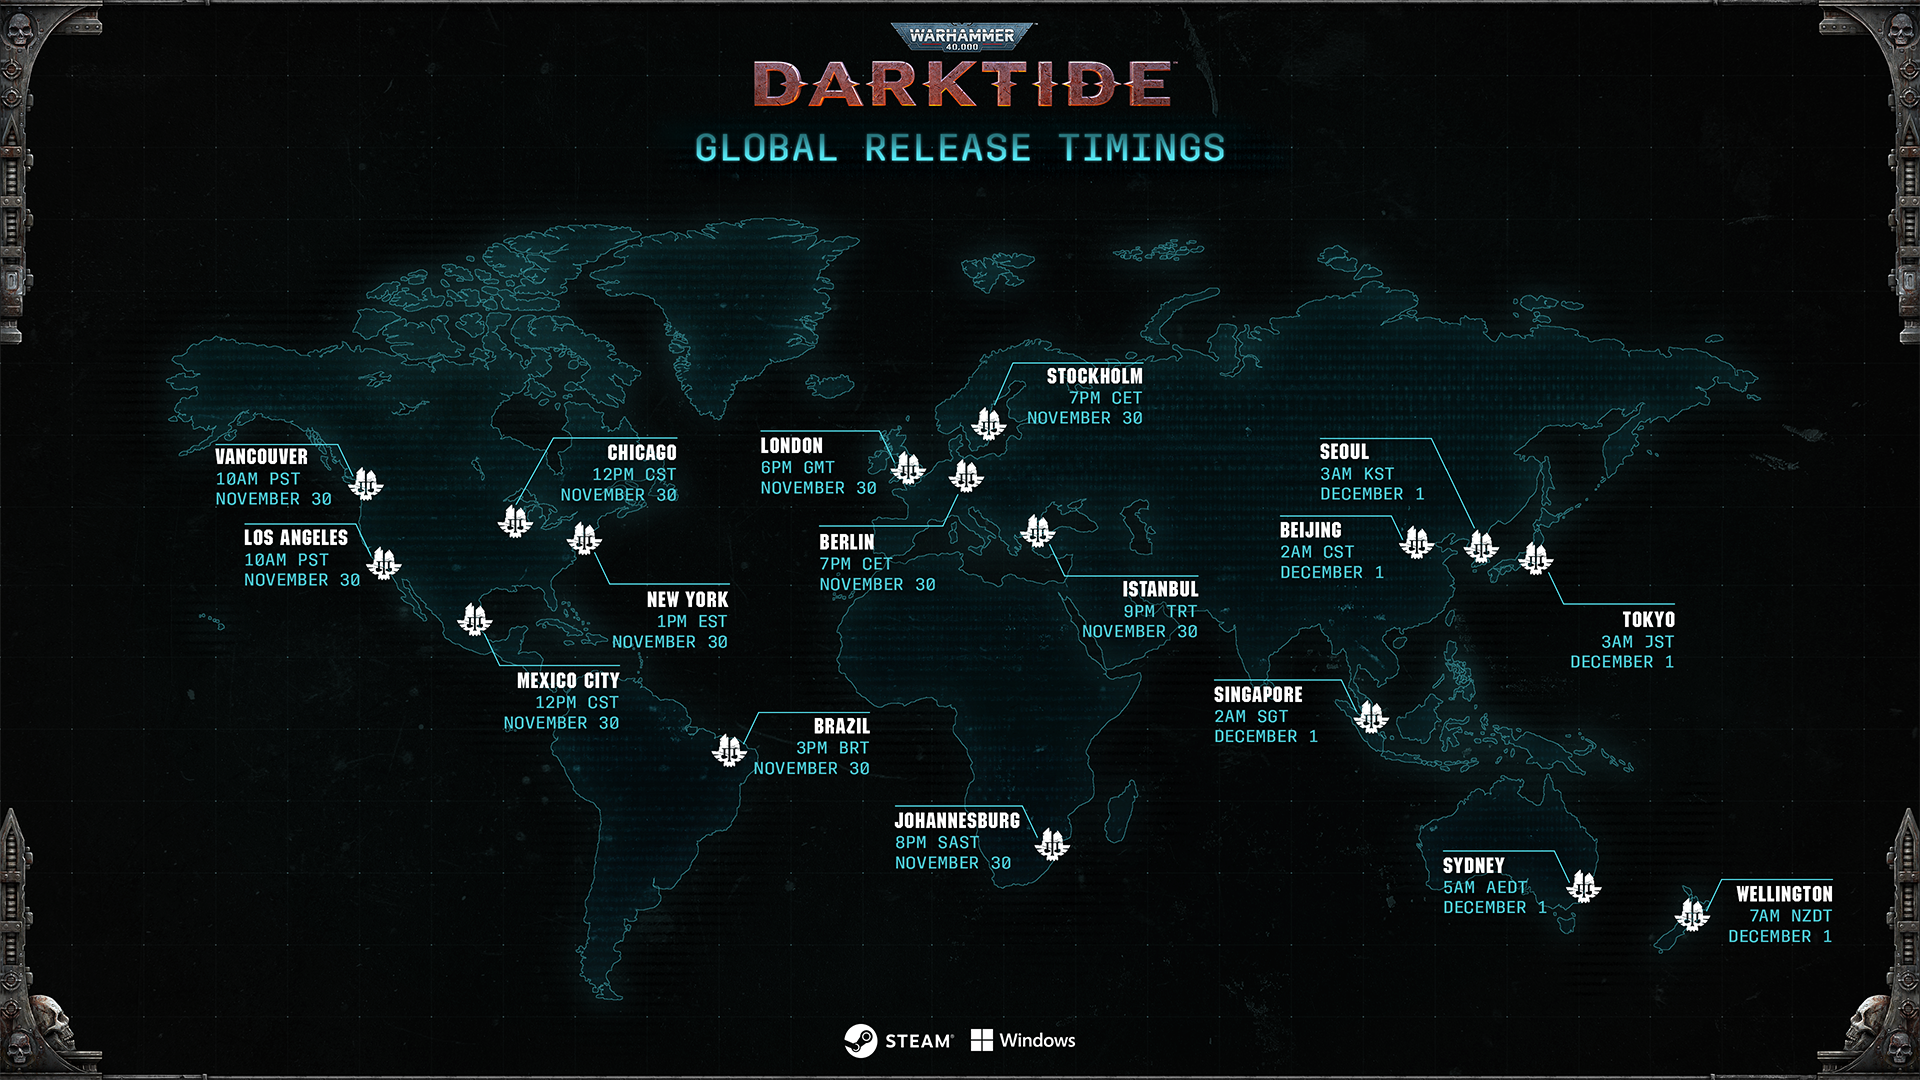 A map showing Darktide launch timings.